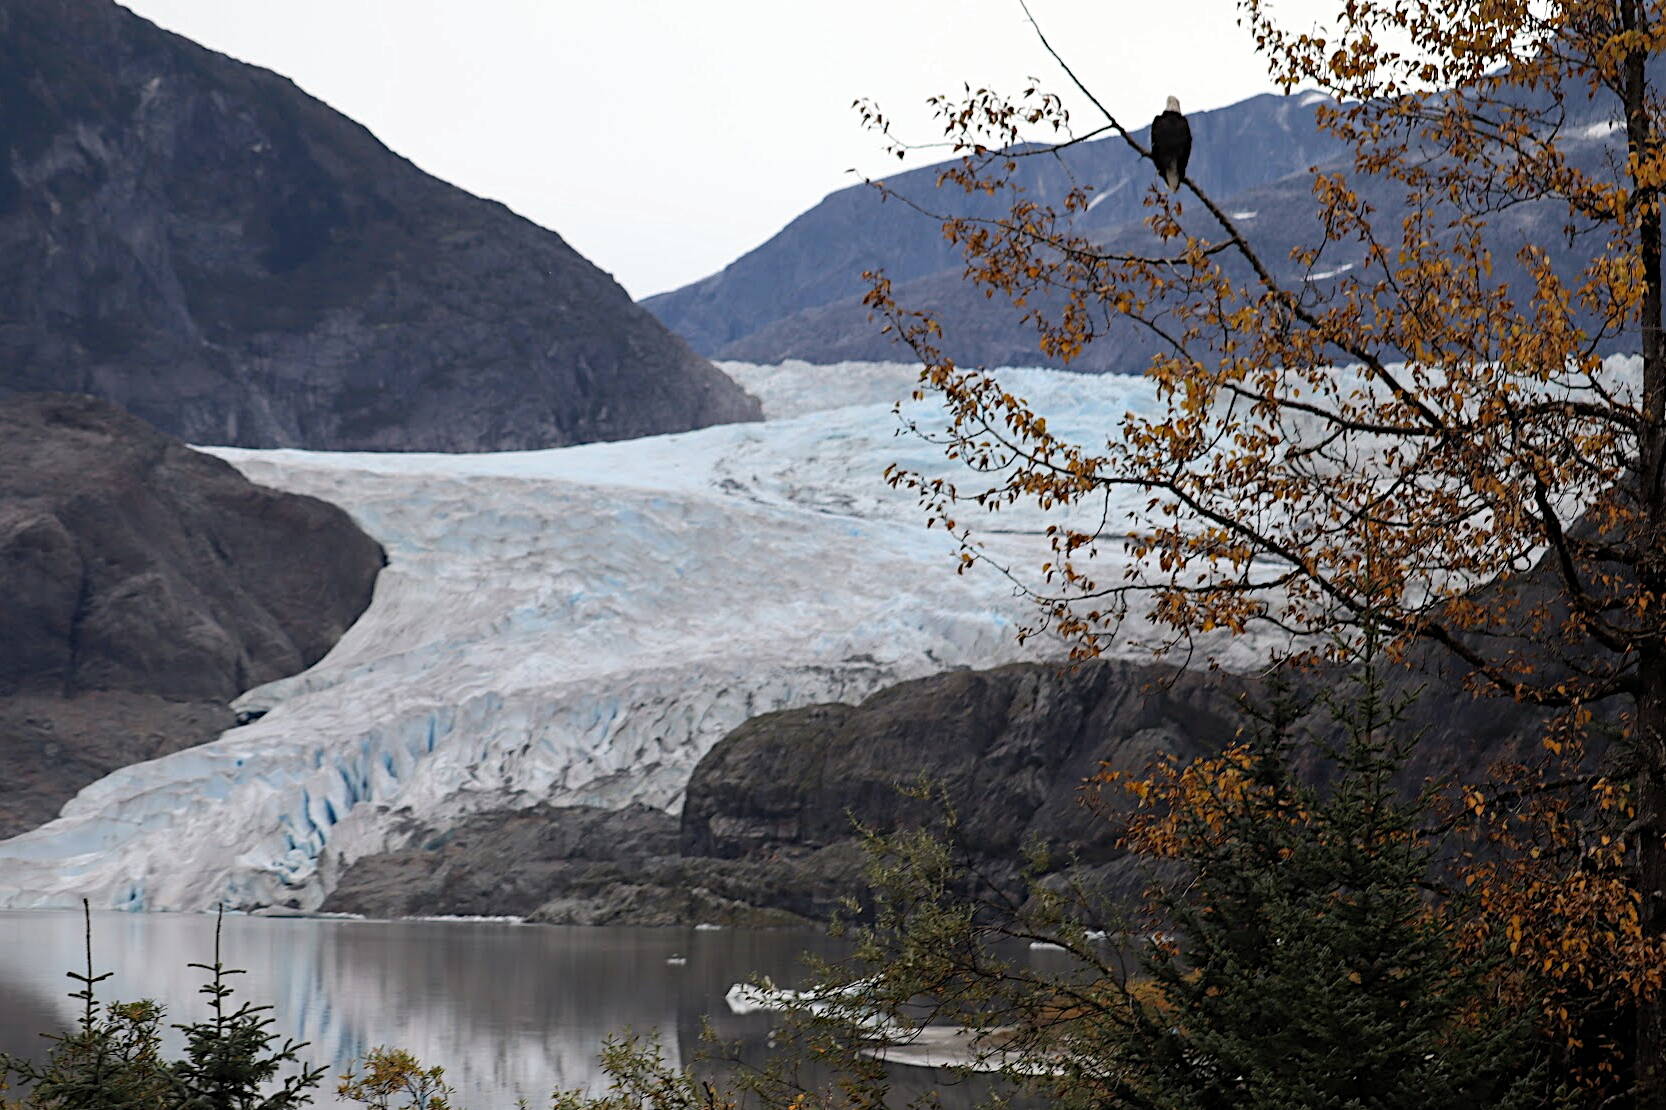 A bald eagle looks toward the Mendenhall Glacier near the visitor center on Tuesday. The U.S. Forest Service is proposing expanding a ban on mining and other mineral resource extraction activities from an area on the glacier a short distance from the existing face to several hundred yards inward, extending outward to the mountainsides along both sides. (Jonson Kuhn / Juneau Empire)